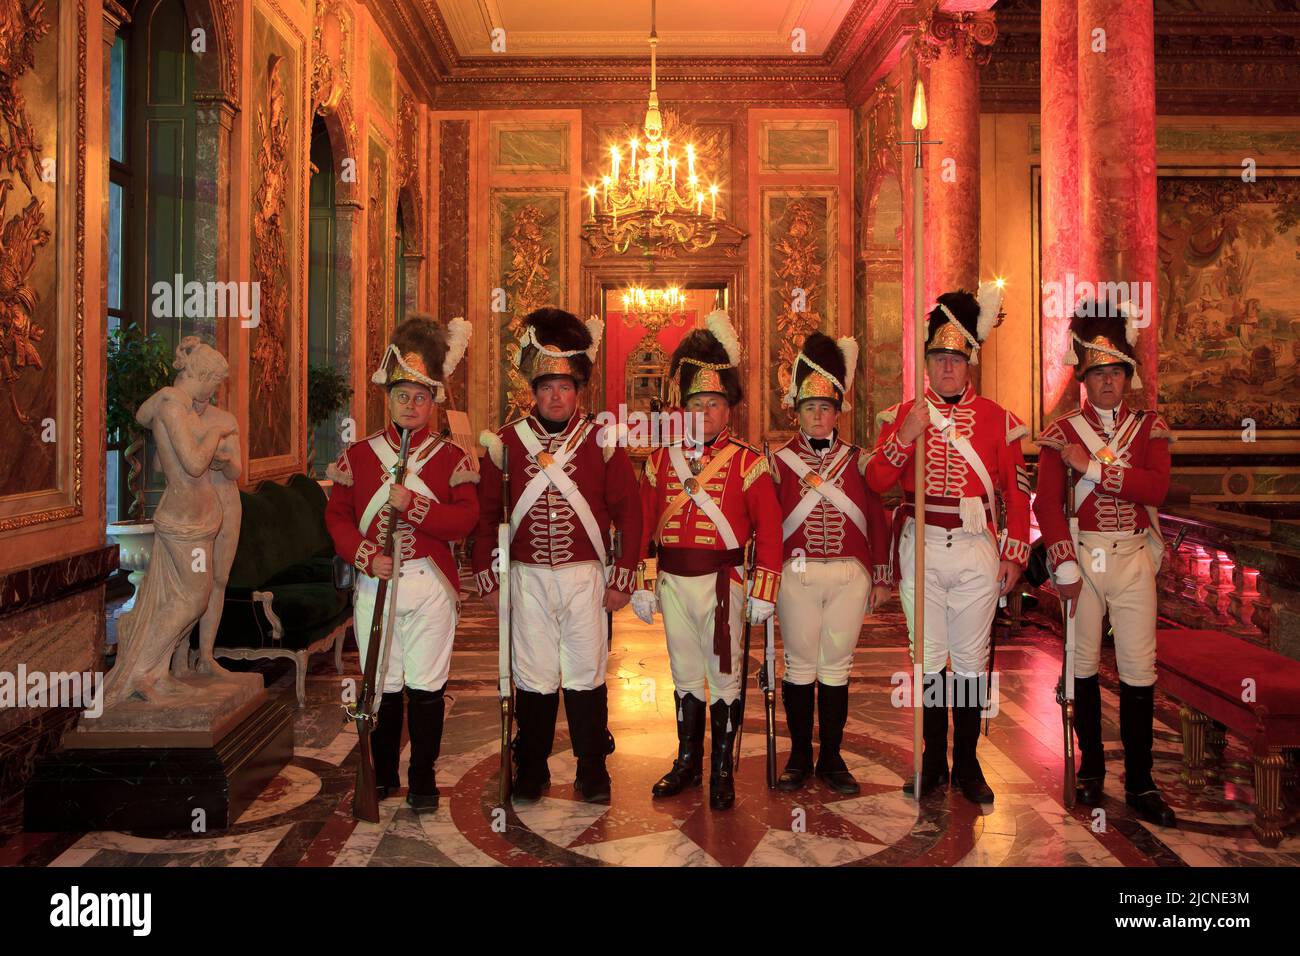 British Napoleonic era soldiers at the Duchess of Richmond's ball at Egmont Palace in Brussels, Belgium Stock Photo